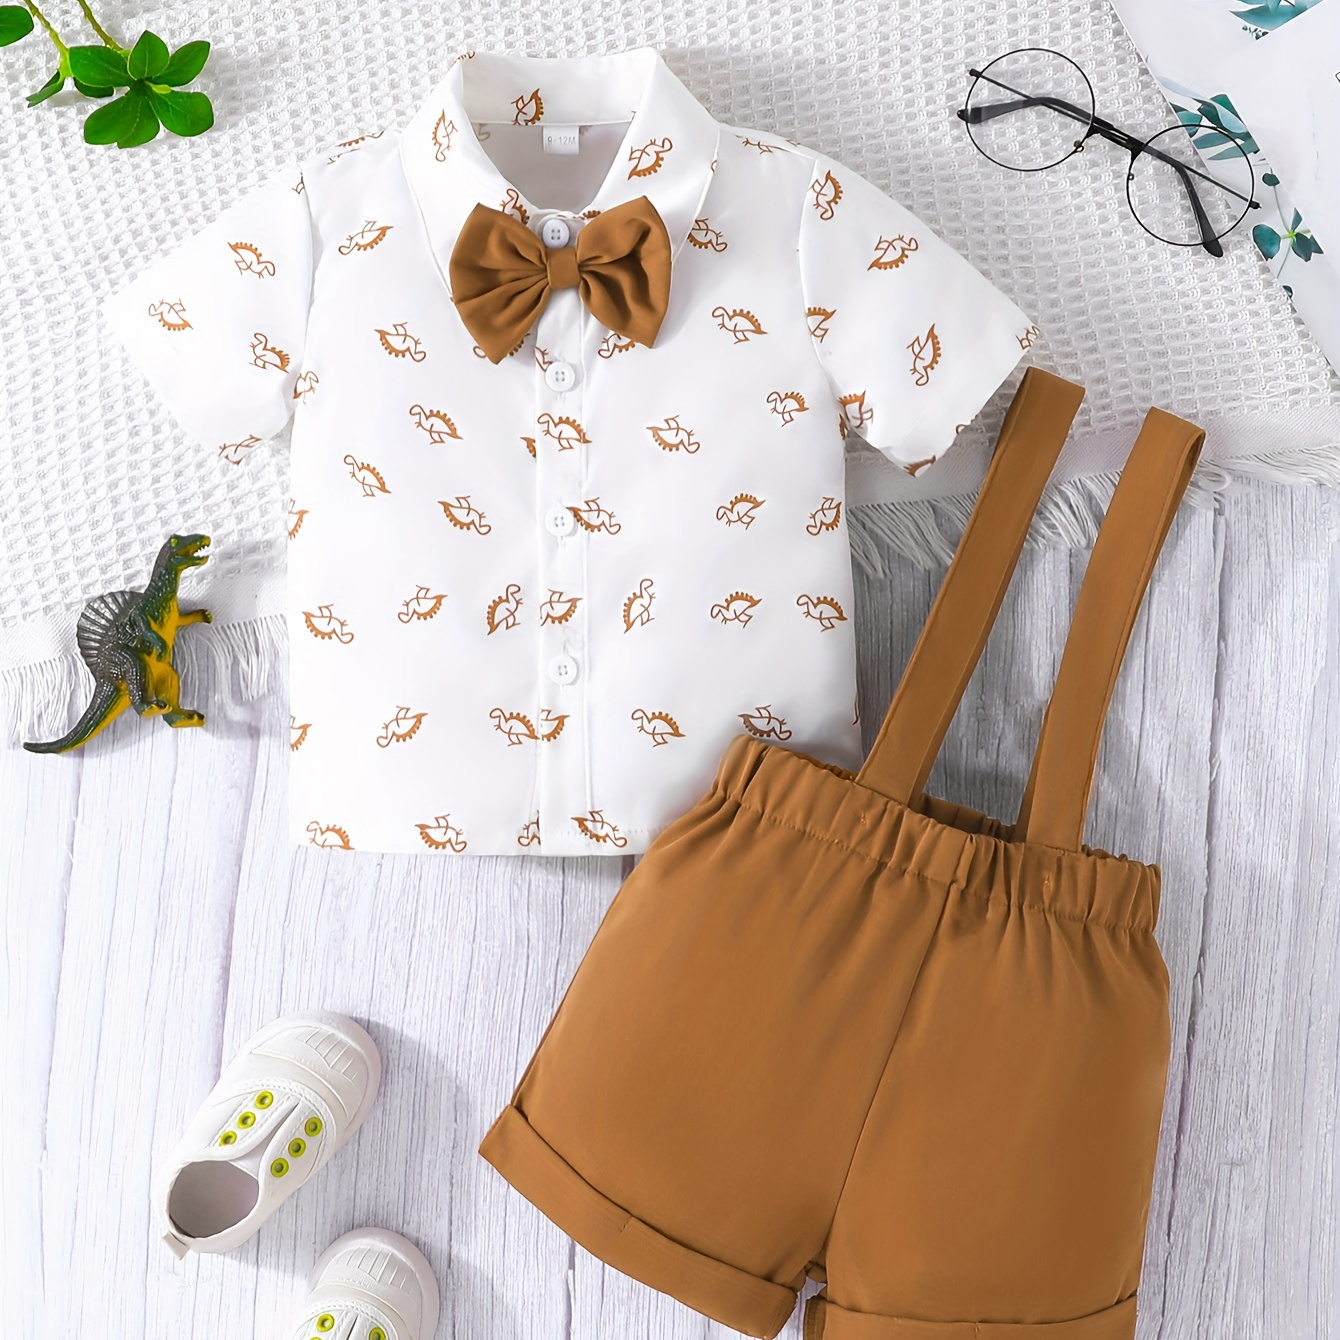 

2pcs Infant & Toddler's Casual Gentleman Outfit, Dinosaur Pattern Short Sleeve Shirt & Overall Shorts, Baby Boy's Clothes